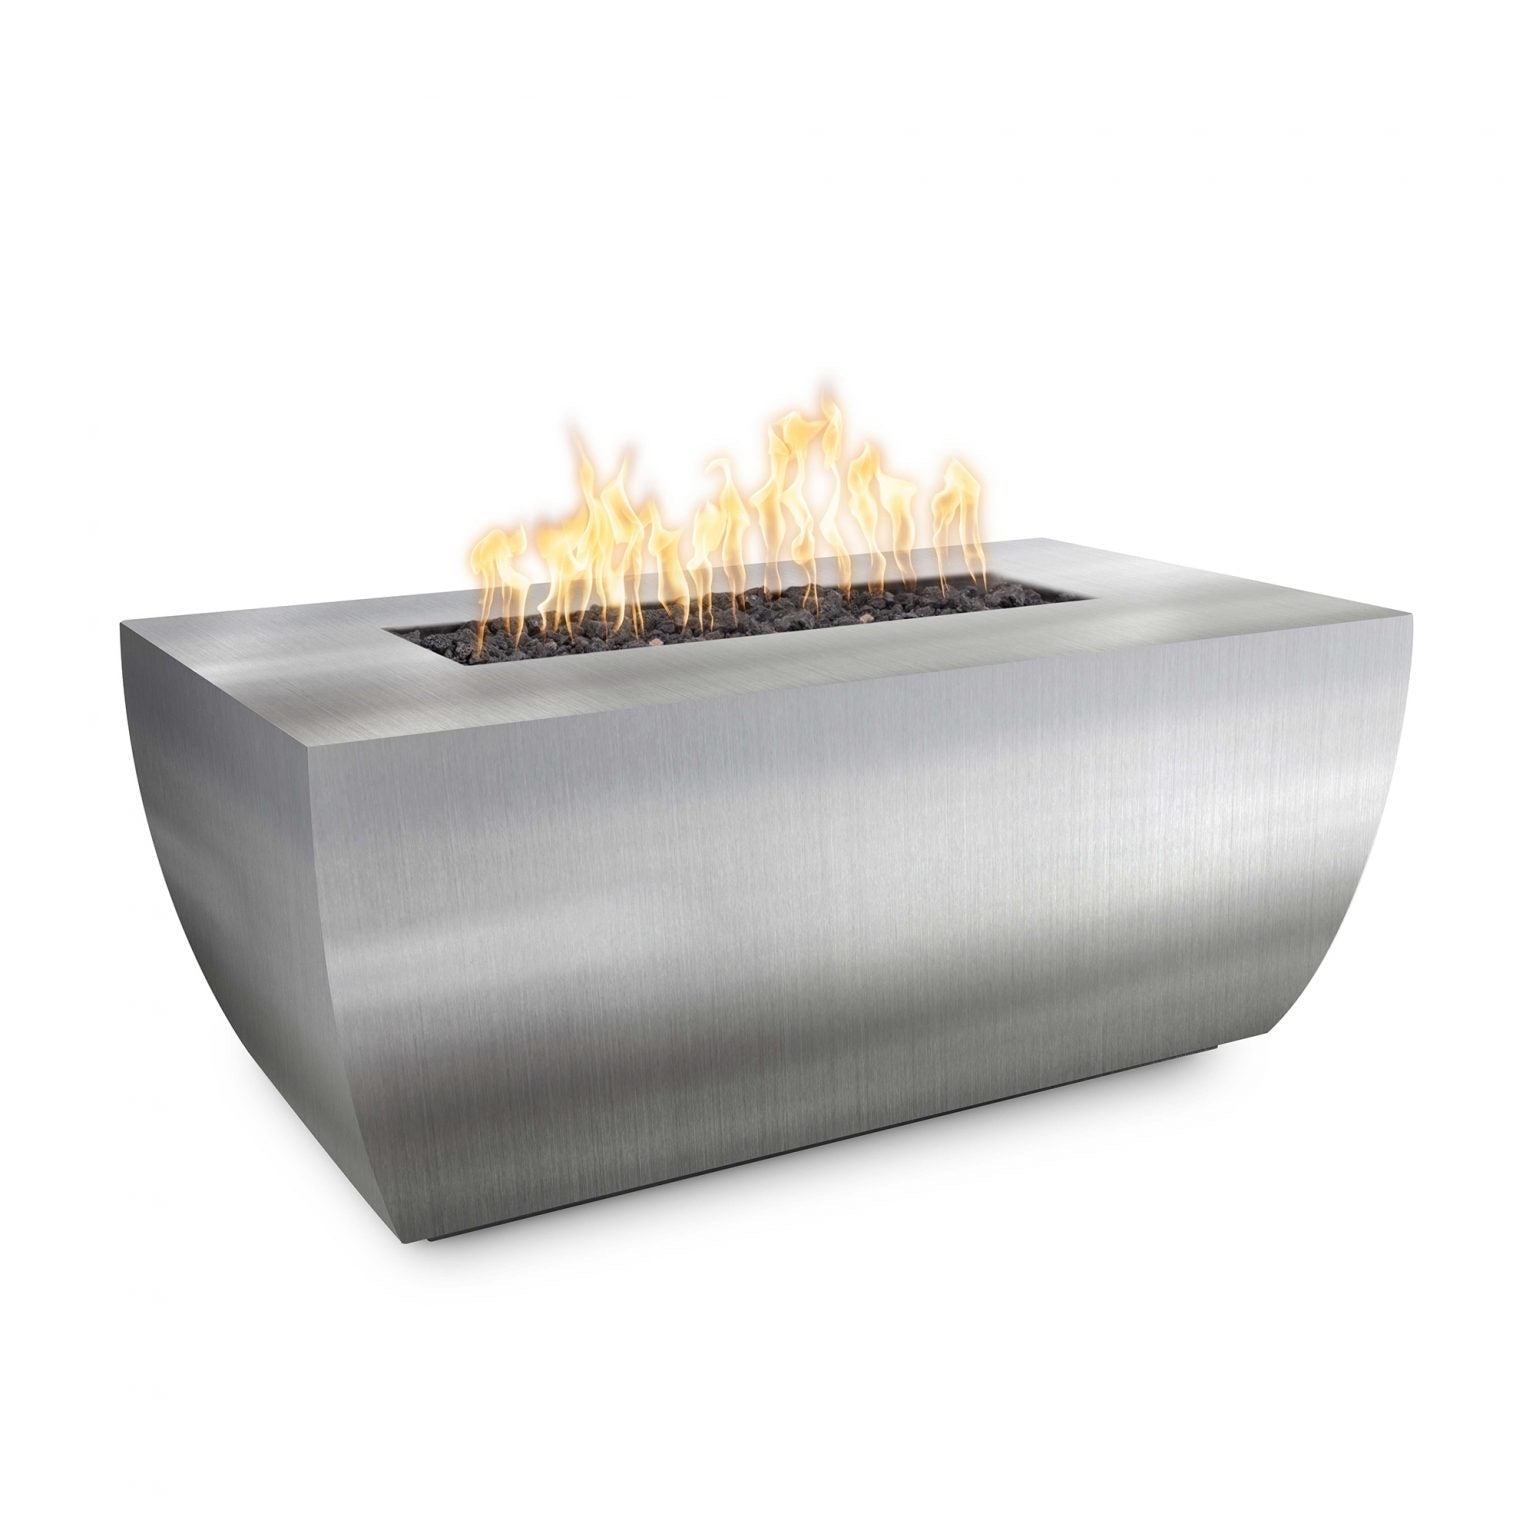 The Outdoor Plus Fire Pit 48" x 28" / Match Lit The Outdoor Plus Avalon 24" Tall Linear Fire Pit | Stainless Steel OPT-AVLSS4824